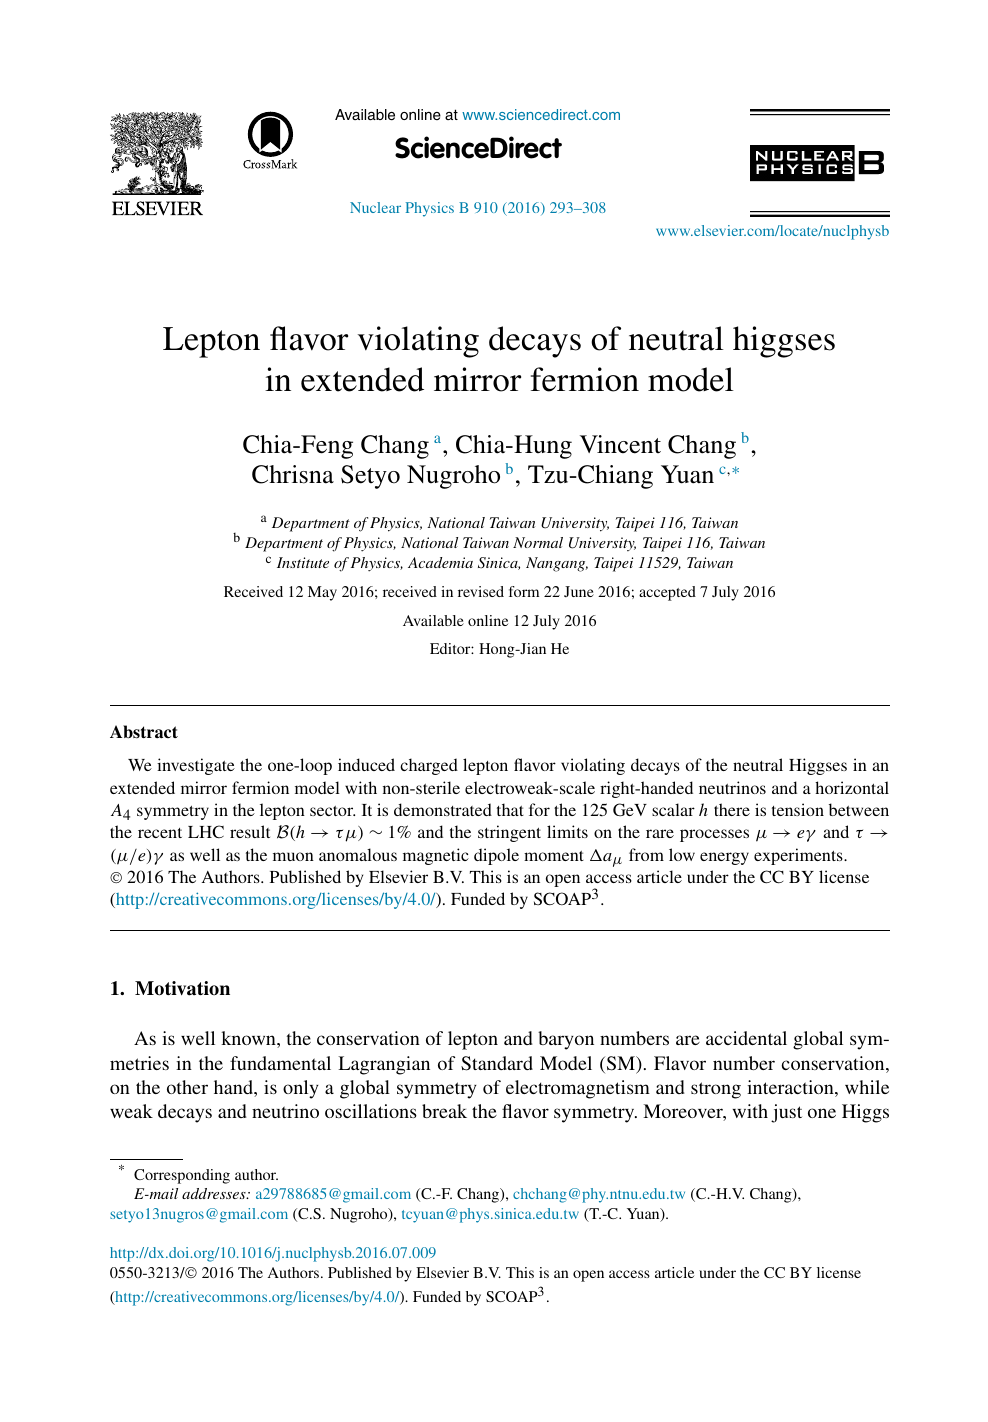 Lepton Flavor Violating Decays Of Neutral Higgses In Extended Mirror Fermion Model Topic Of Research Paper In Physical Sciences Download Scholarly Article Pdf And Read For Free On Cyberleninka Open Science